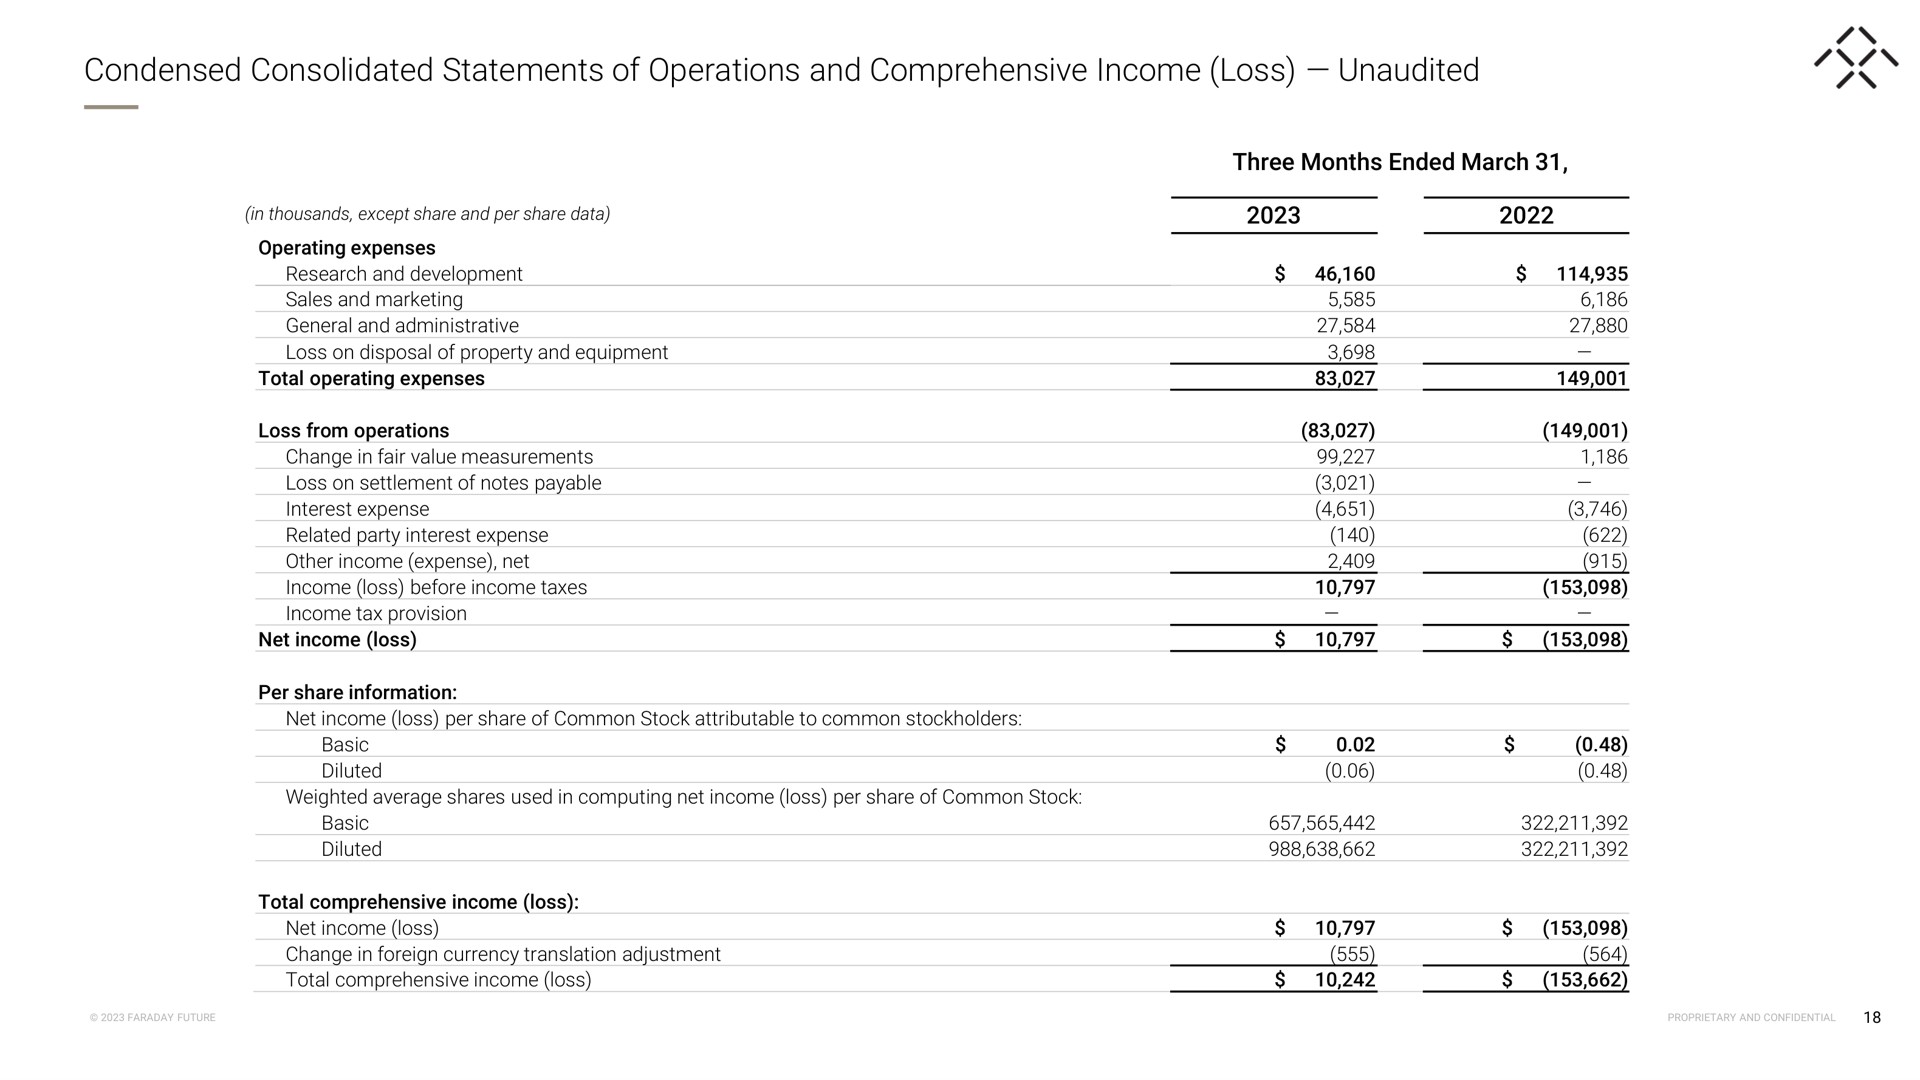 condensed consolidated statements of operations and comprehensive income loss unaudited | Faraday Future